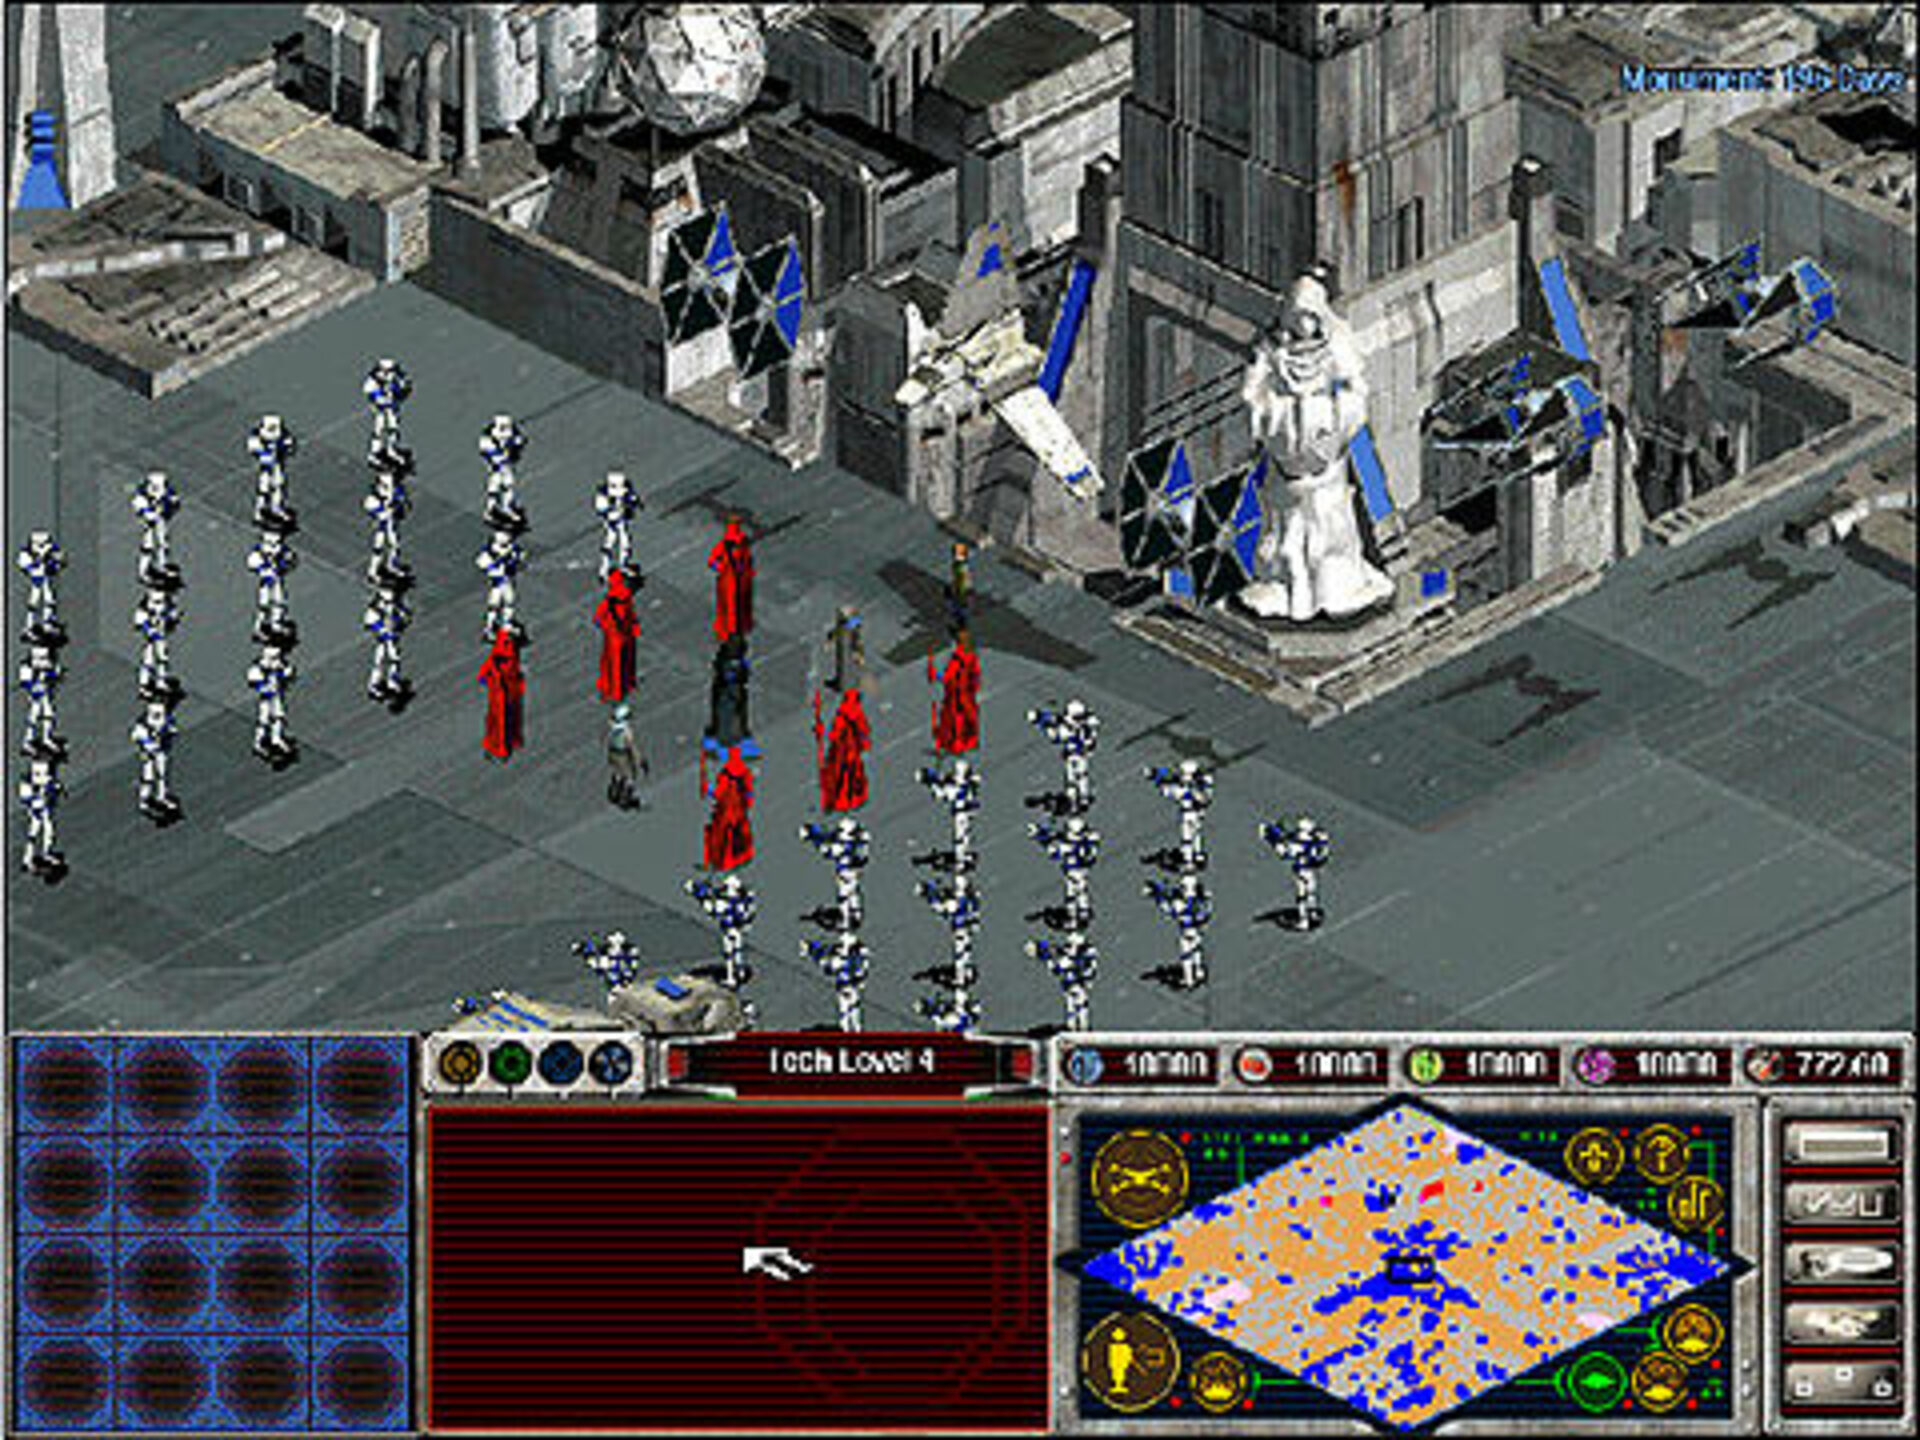 Clone campaigns. Star Wars Galactic Battlegrounds. Star Wars: Galactic Battlegrounds: Clone campaigns. Star Wars: Galactic Battlegrounds (2001). Star Wars Galactic Battlegrounds Sith.